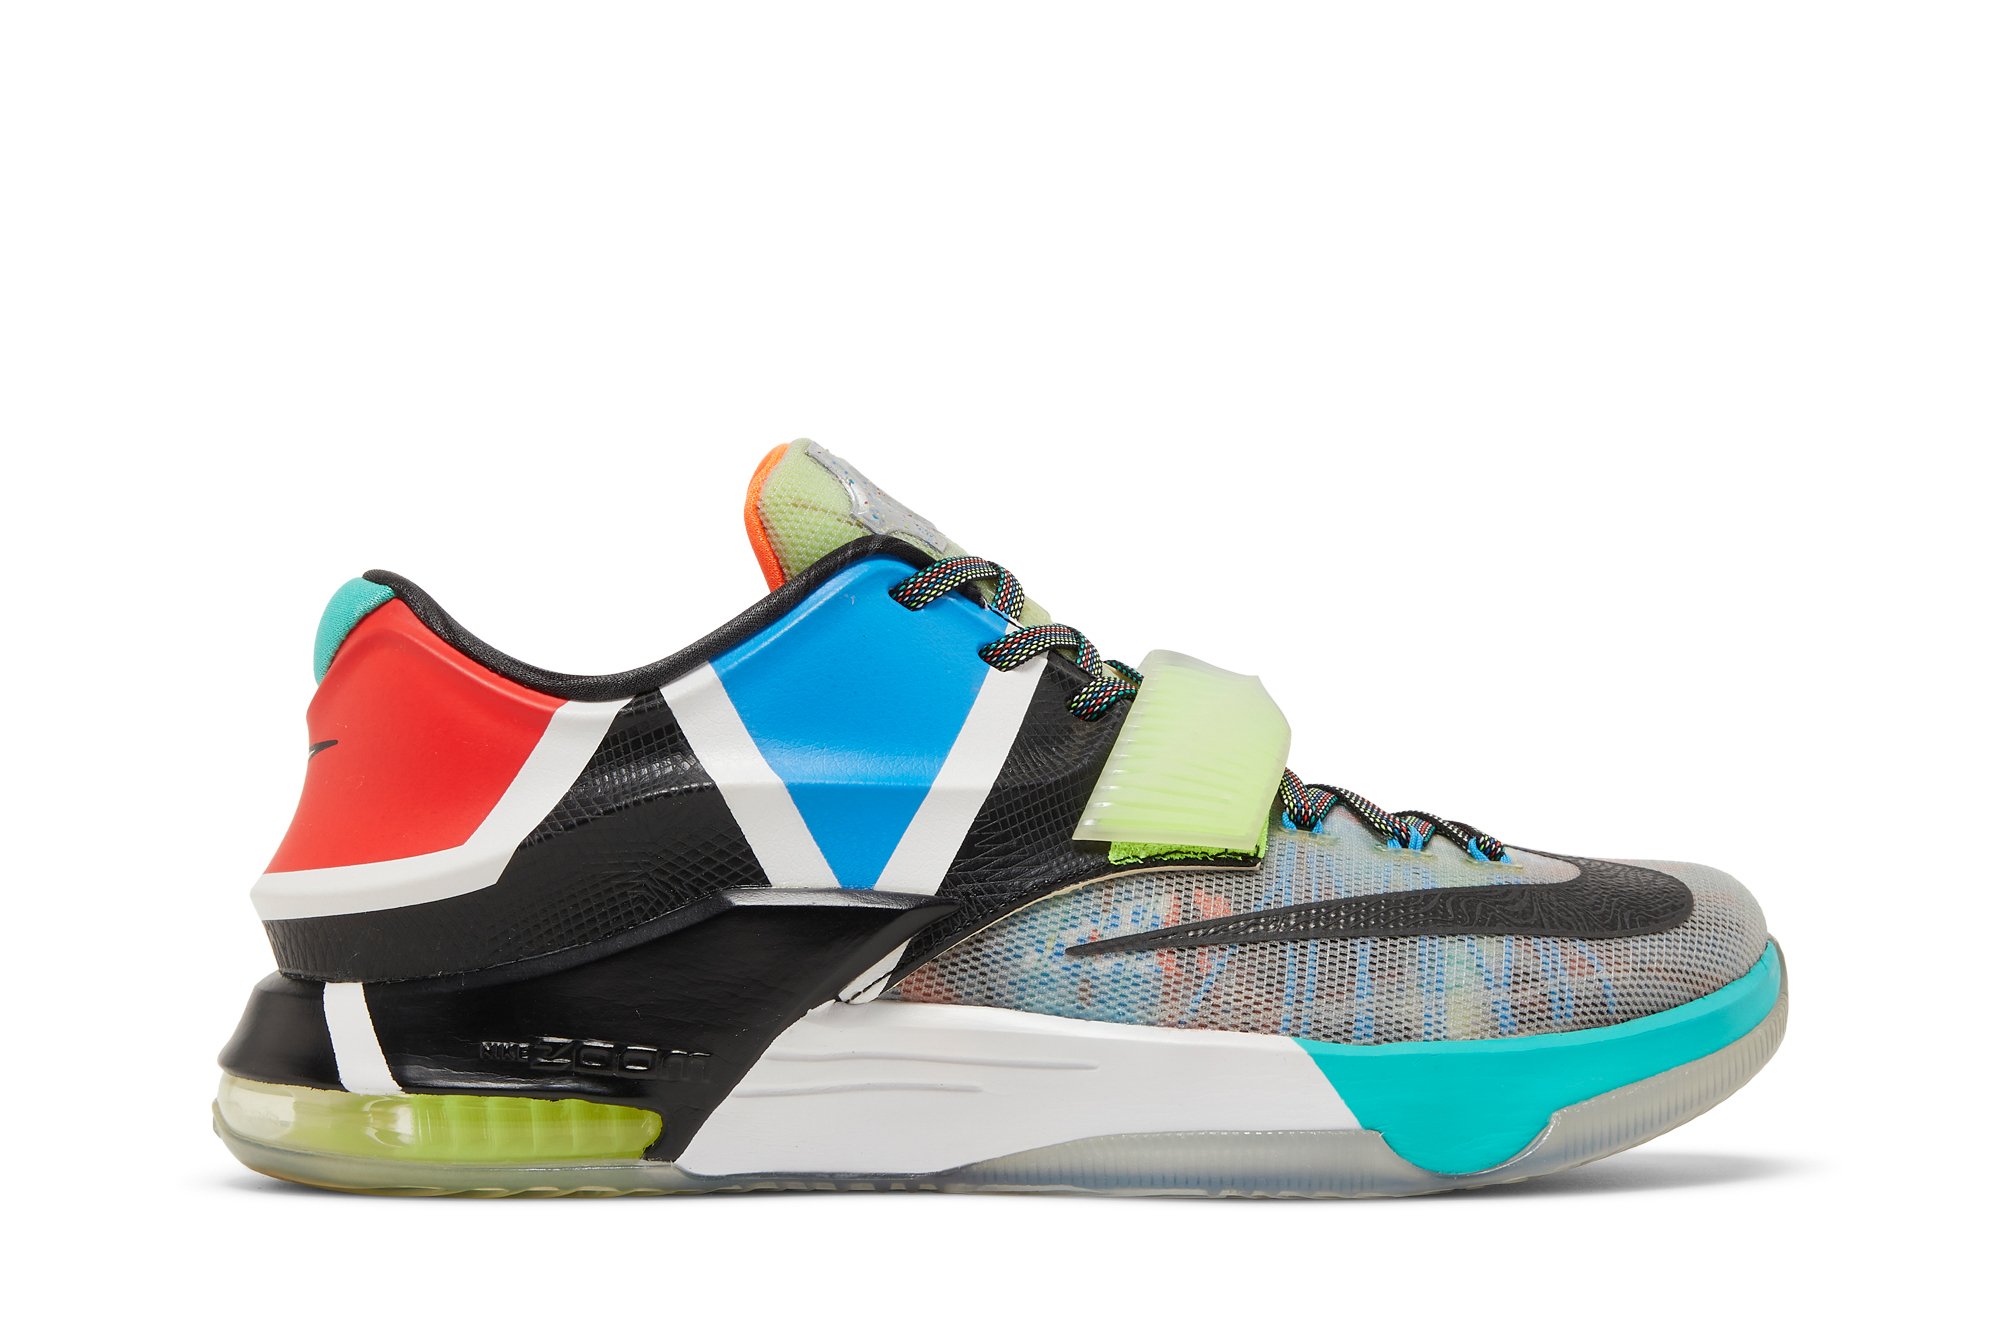 KD 7 'What The KD'